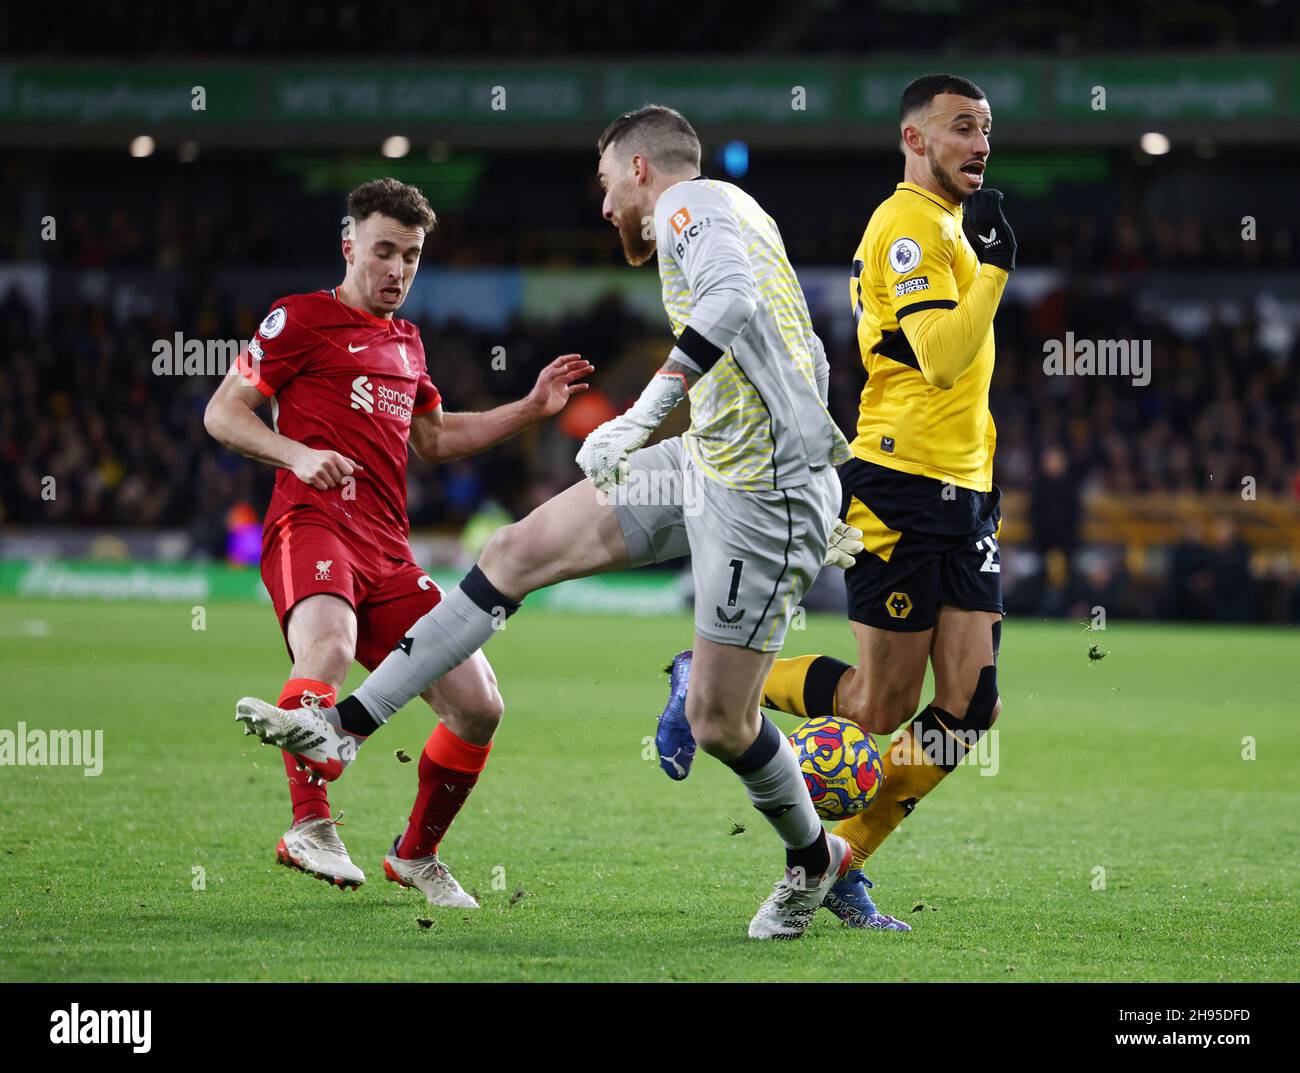 Wolverhampton, England, 4th December 2021. Jose Sa of Wolverhampton Wanderers comes rushing out and collides with Romain Saiss of Wolverhampton Wanderers leaving Diogo Jota of Liverpool with a free shot on goal  during the Premier League match at Molineux, Wolverhampton. Picture credit should read: Darren Staples / Sportimage Credit: Sportimage/Alamy Live News Stock Photo